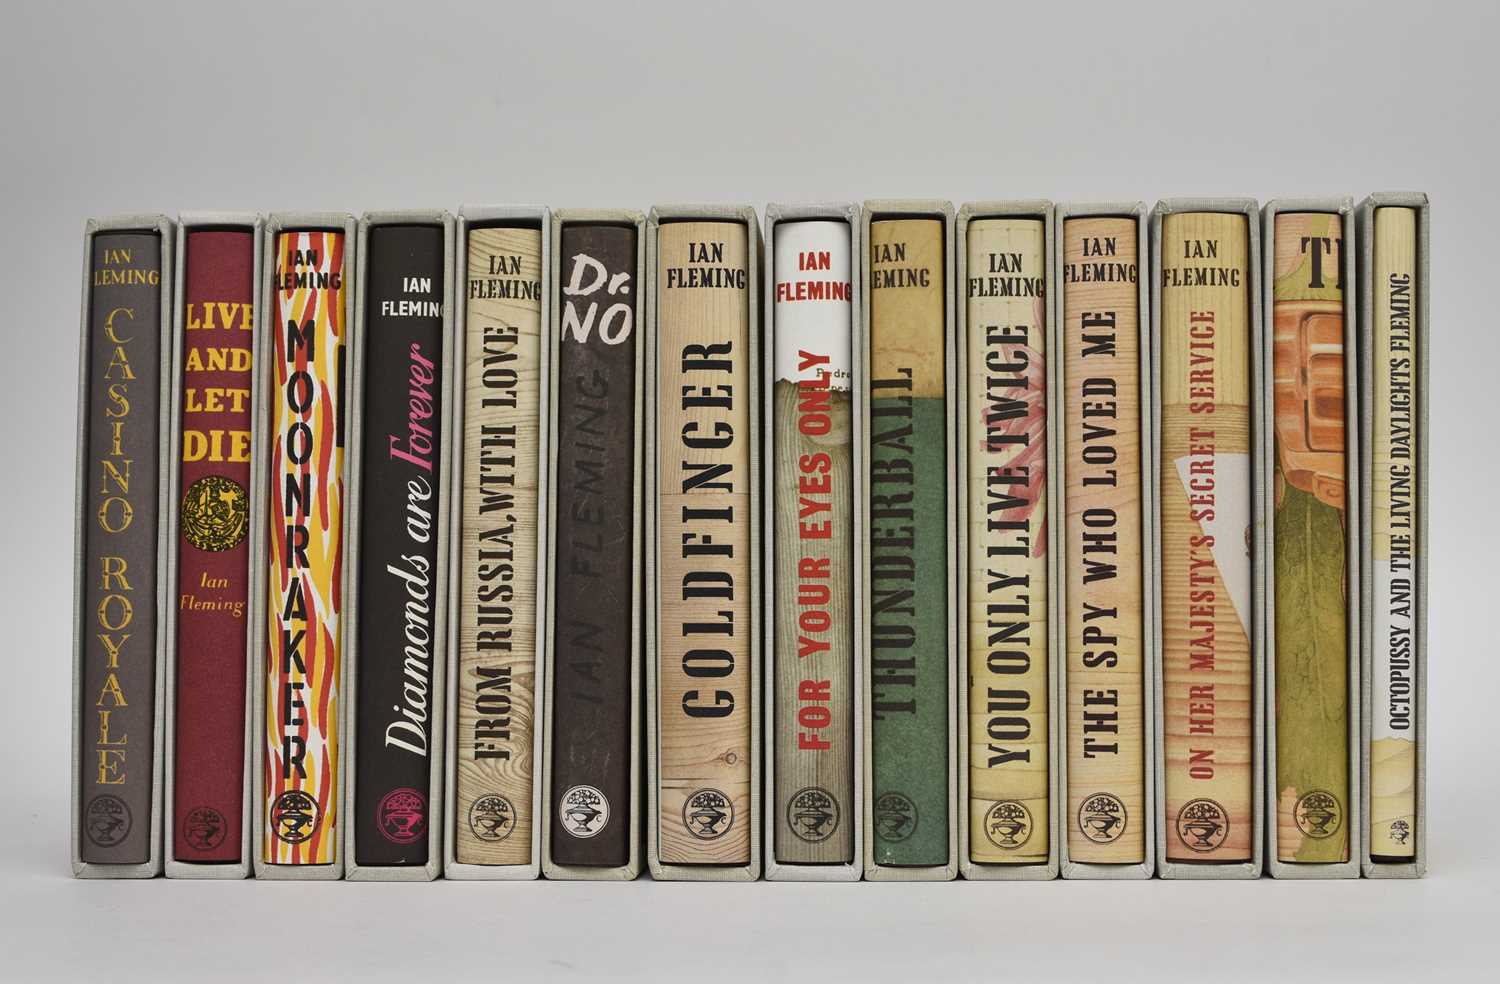 Lot 64 - FLEMING, Ian, The James Bond novels. A complete set of 14 facsimile first editions